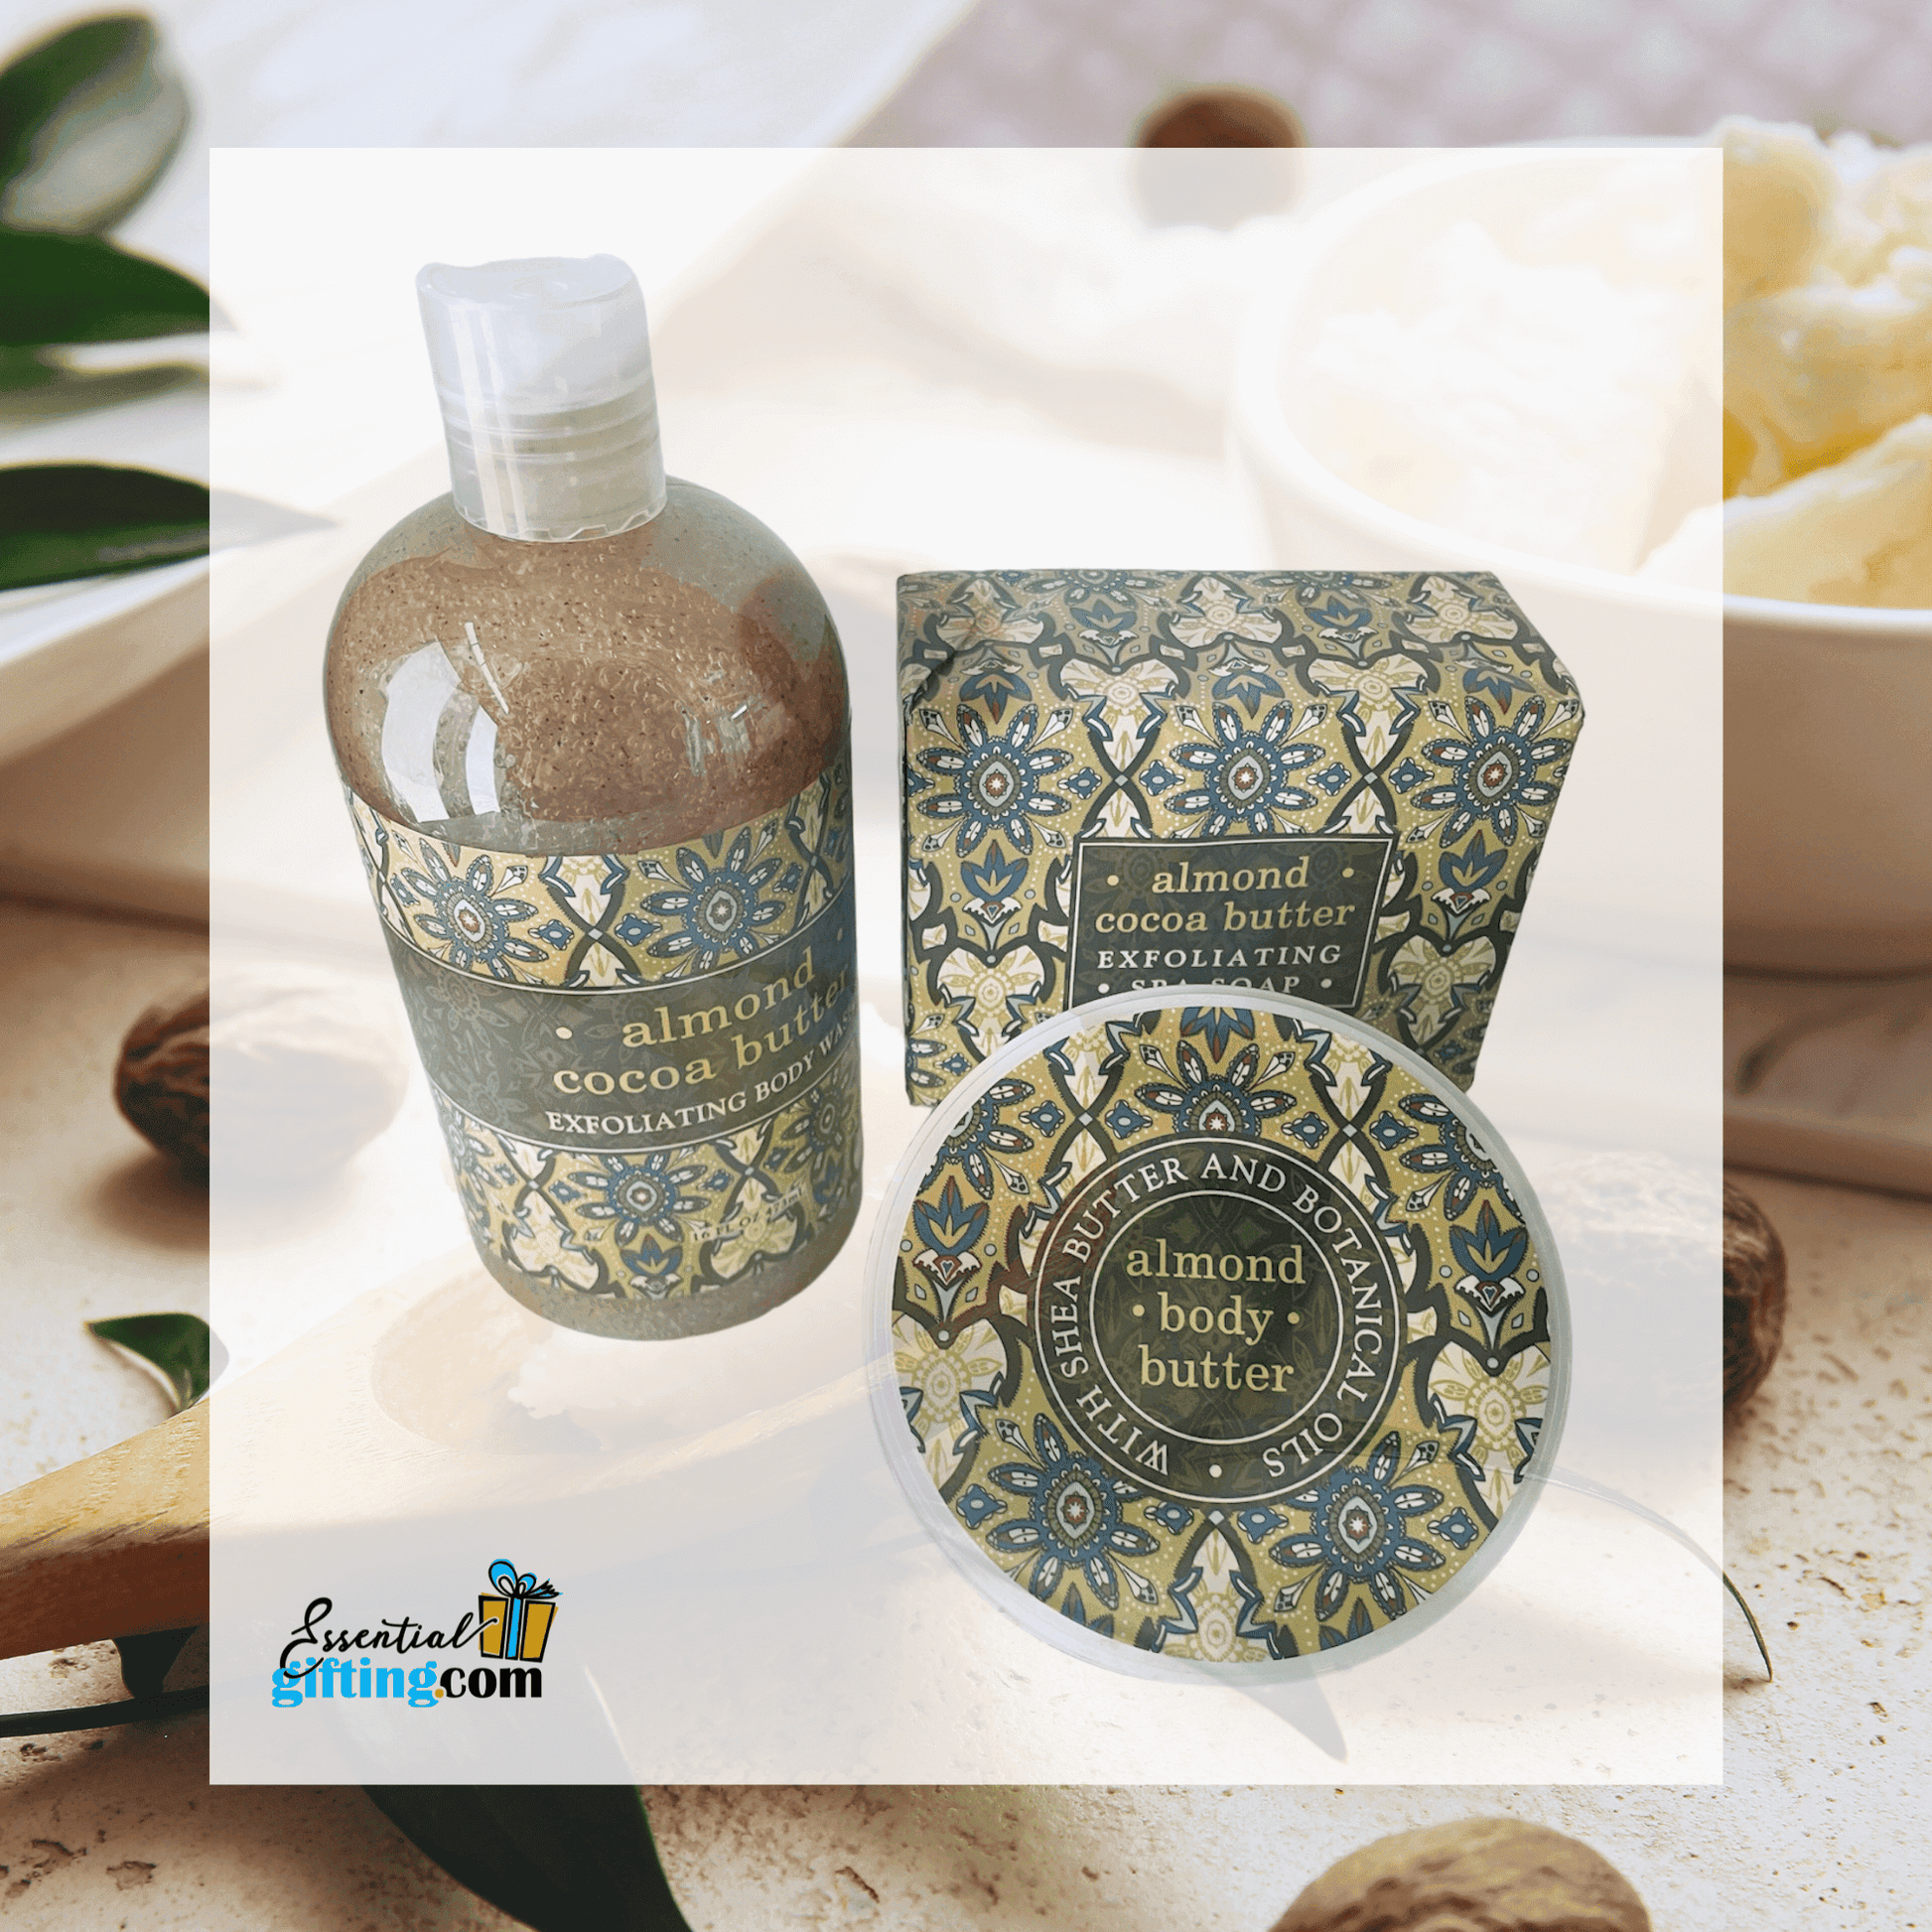 Almond Cocoa Butter Bath and Body Set: Luxurious moisturizing products with soothing almond and cocoa scent.